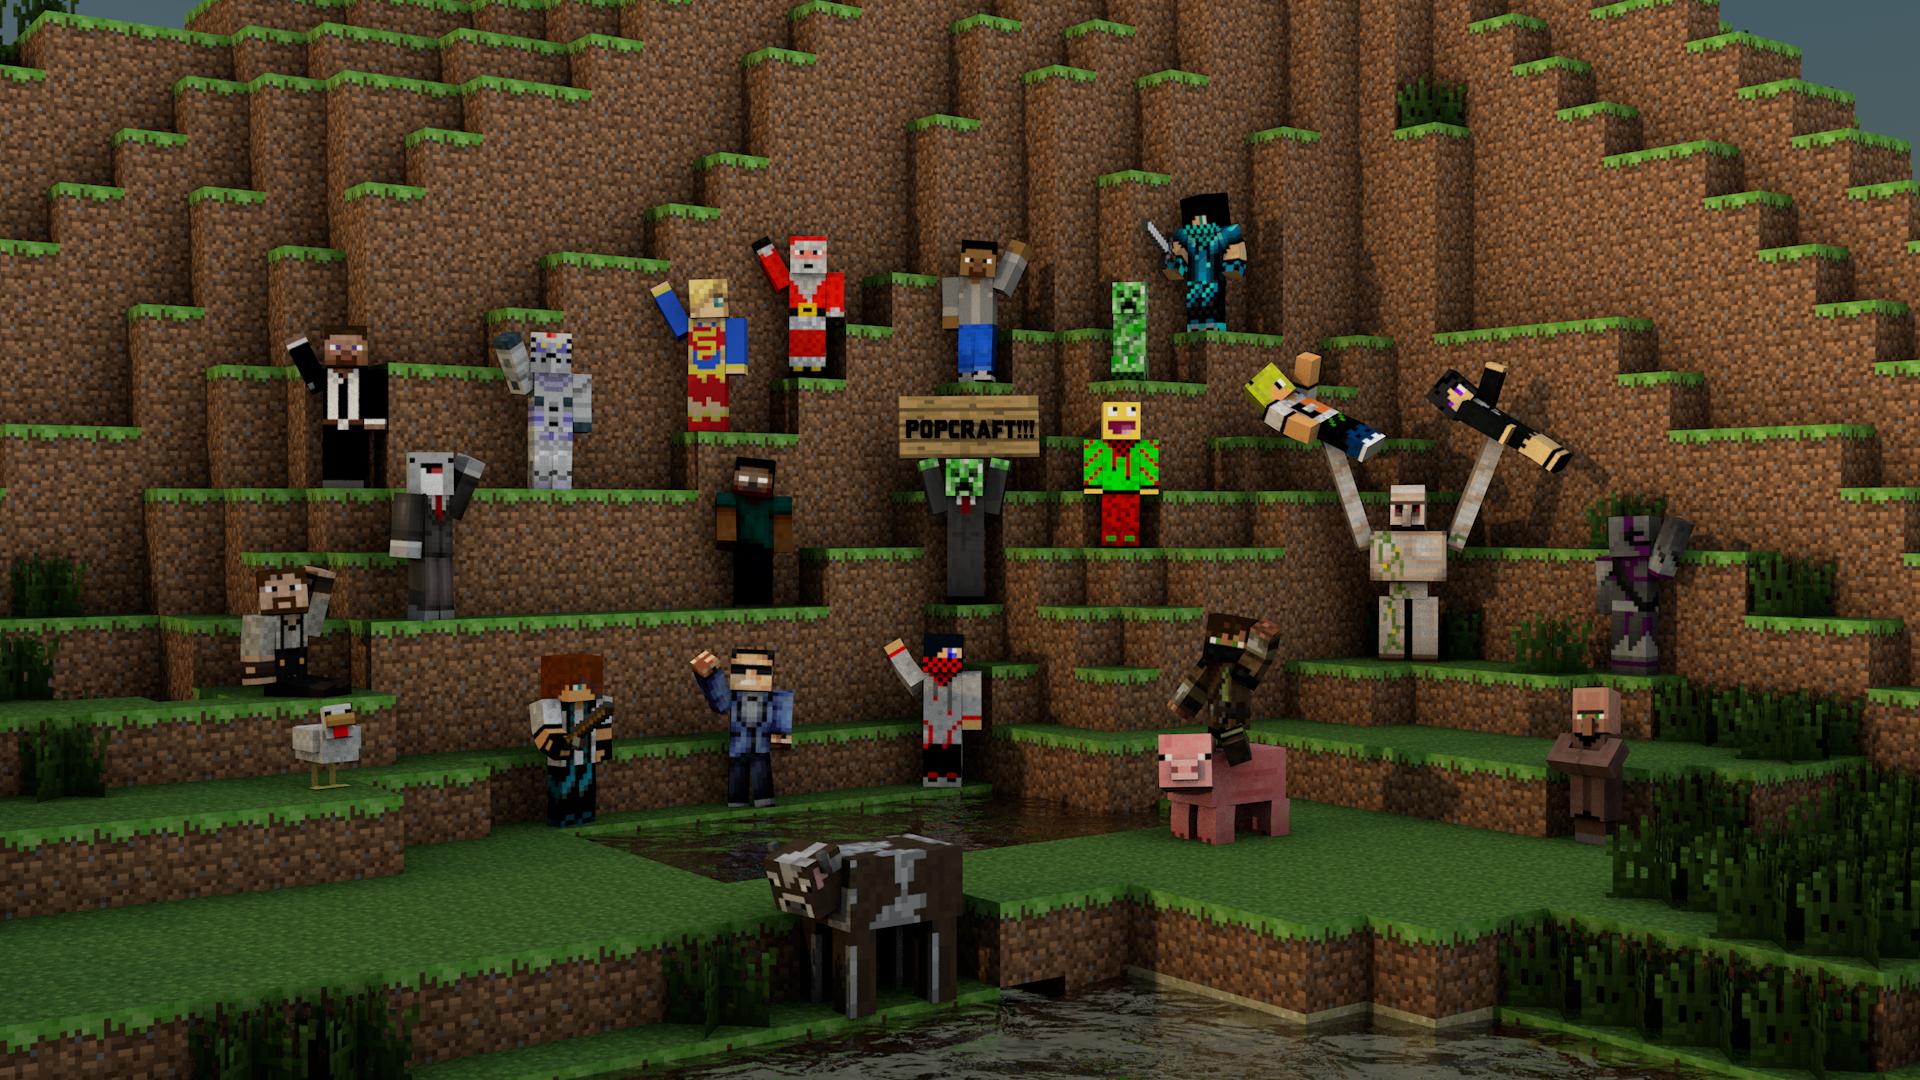 3d HD Minecraft Wallpapers Made With Cinema 4D And Photoshop CS6 ...